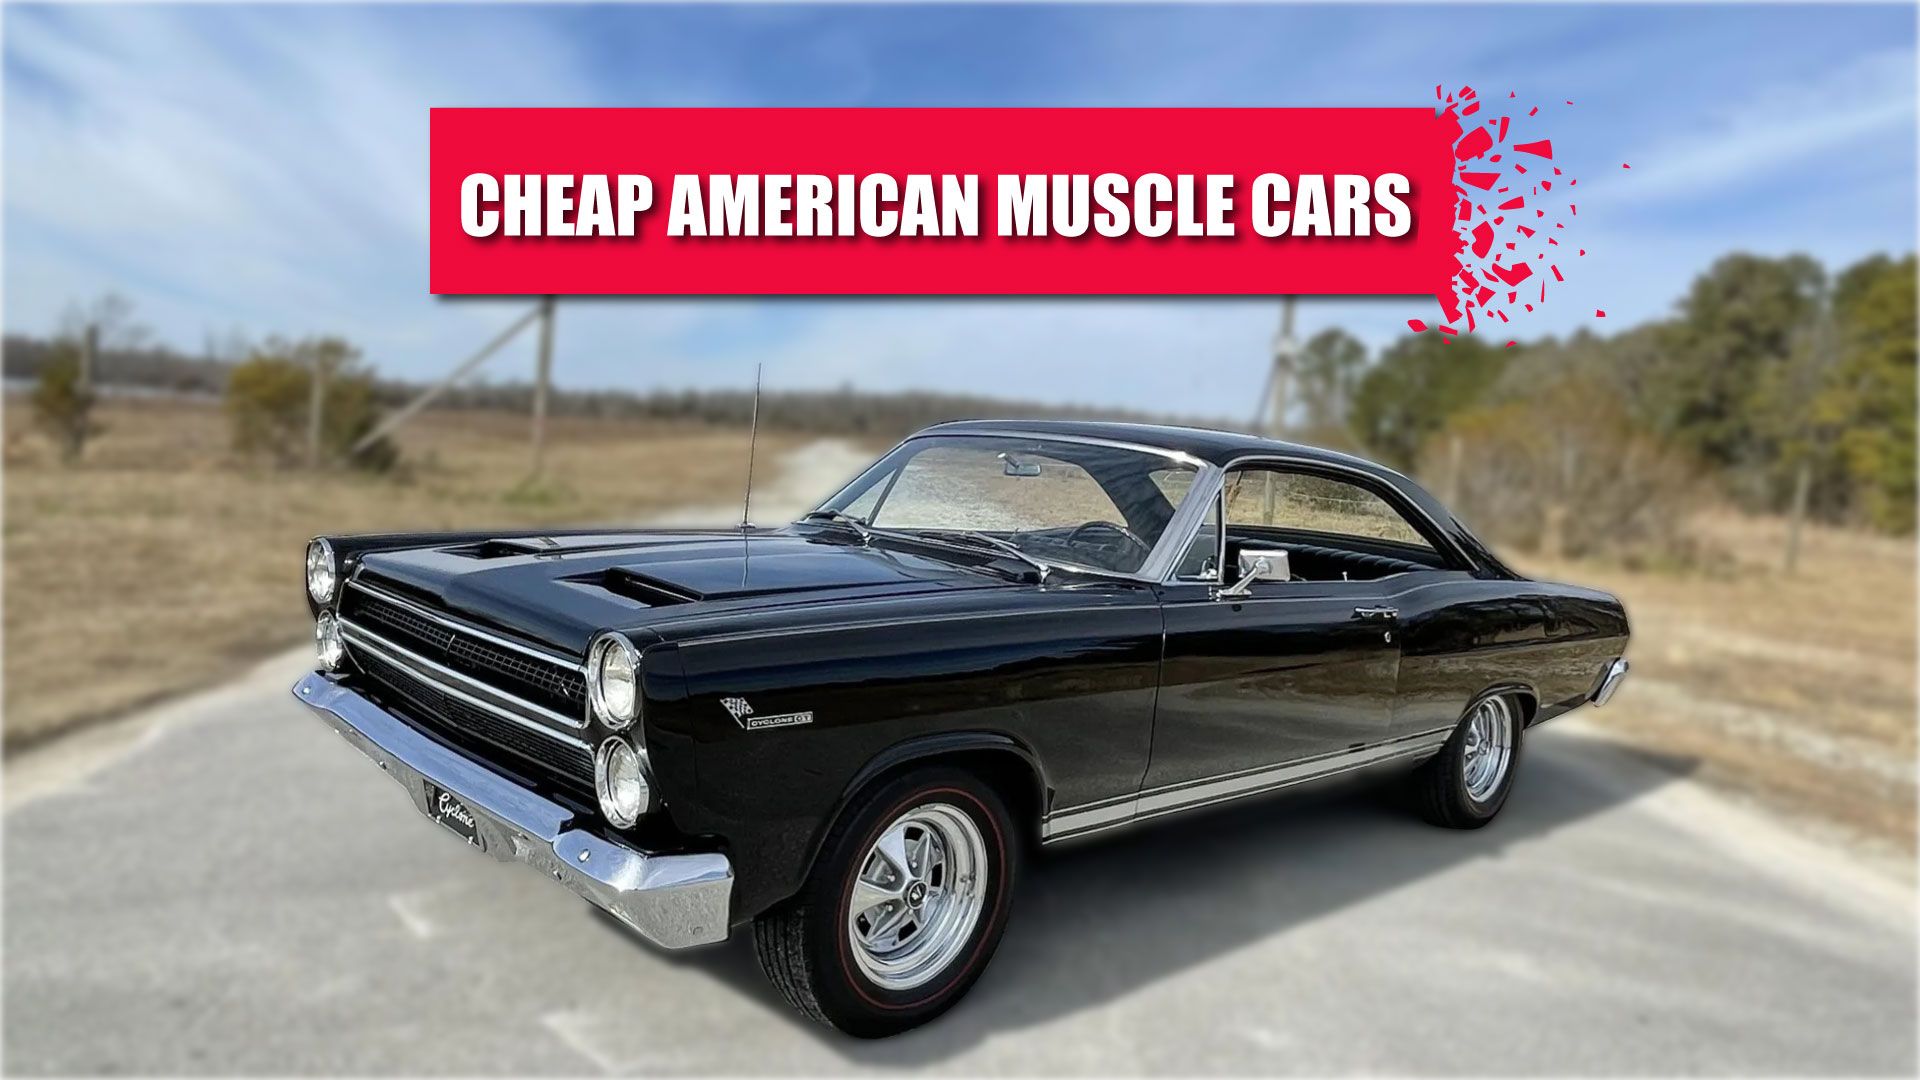 Cheap Muscle cars featured image